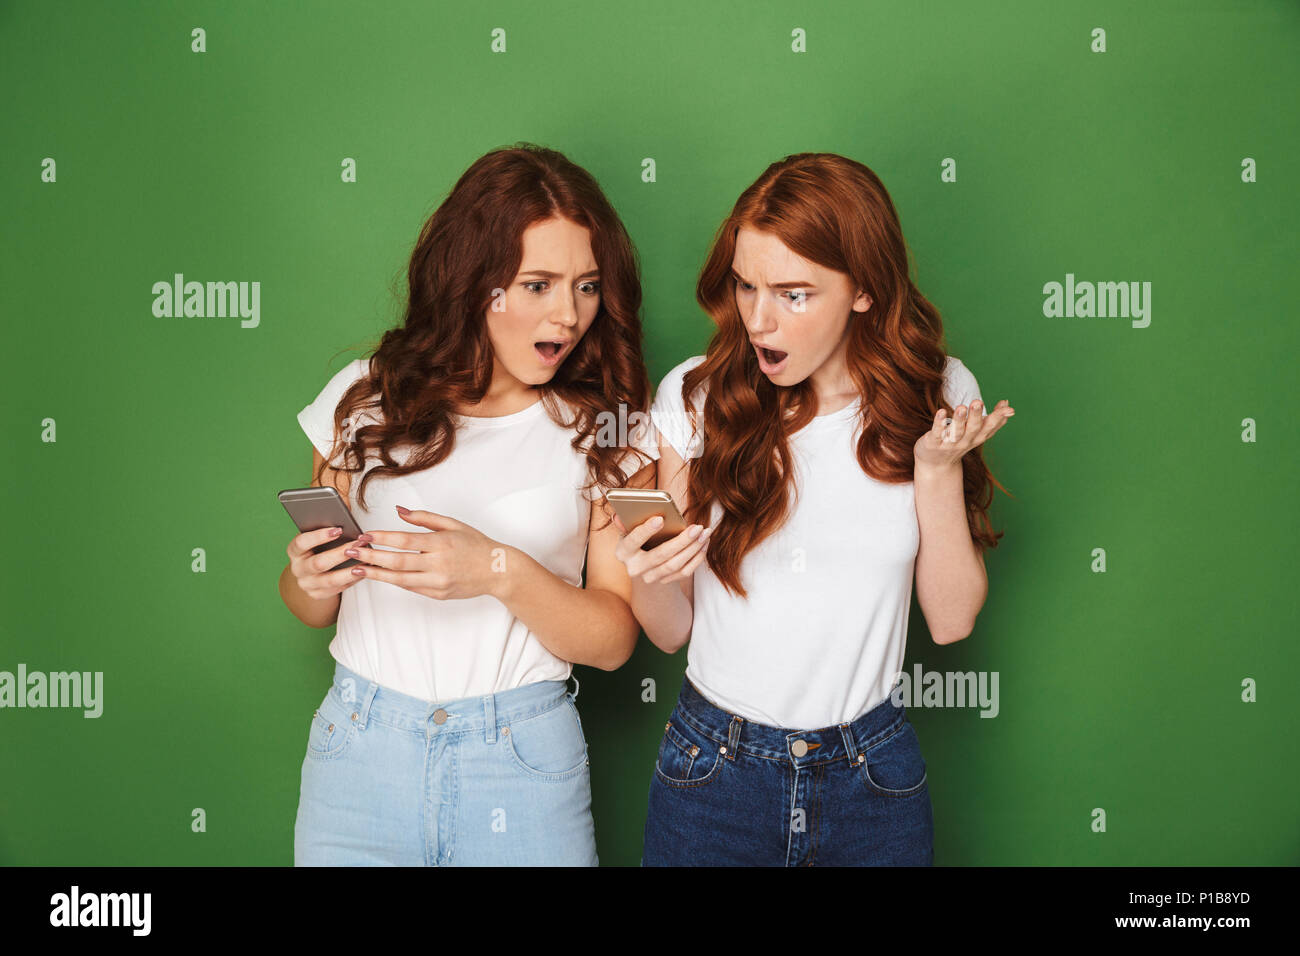 Portrait of two outraged women with red hair using cell phones and expressing indignation isolated over green background Stock Photo